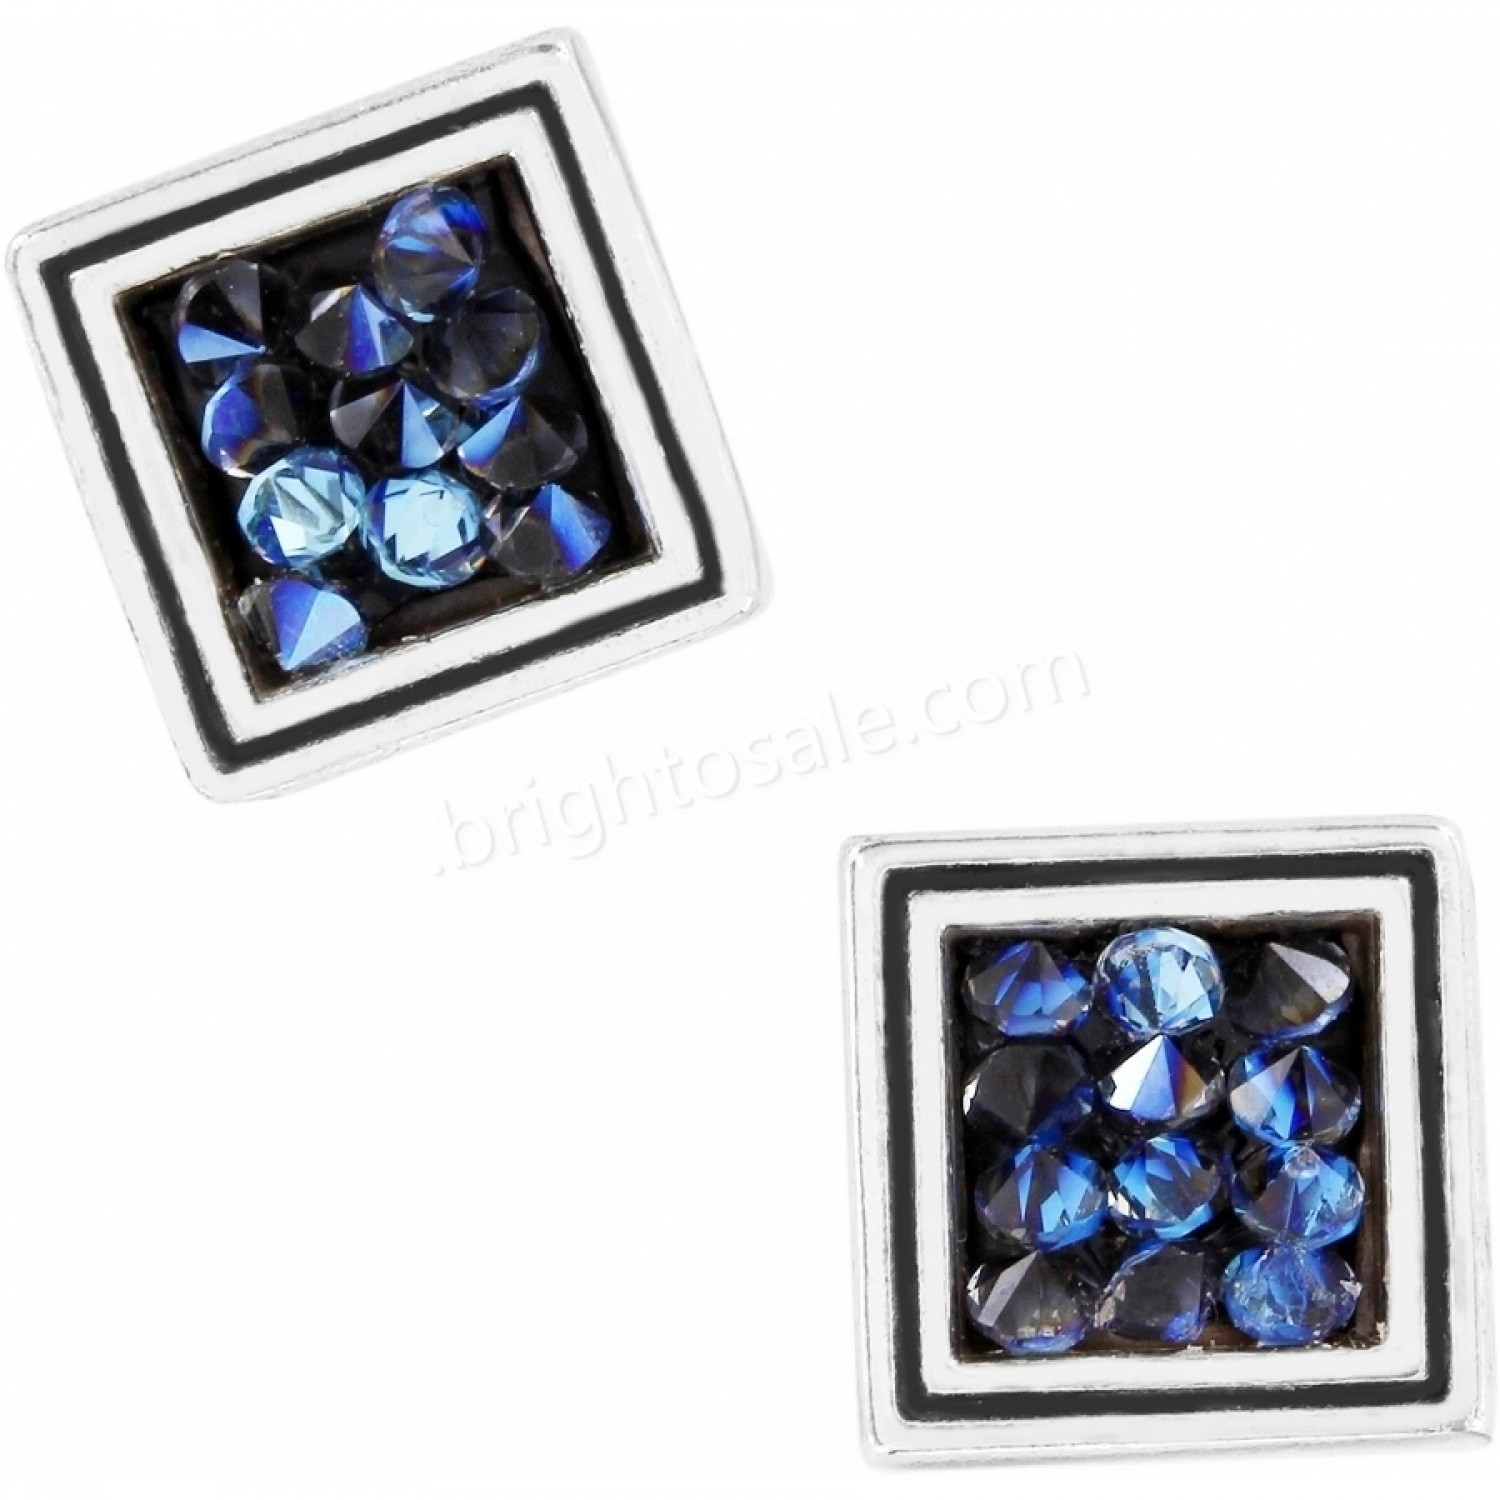 Brighton Collectibles & Online Discount B You Post Drop Earrings - Brighton Collectibles & Online Discount B You Post Drop Earrings